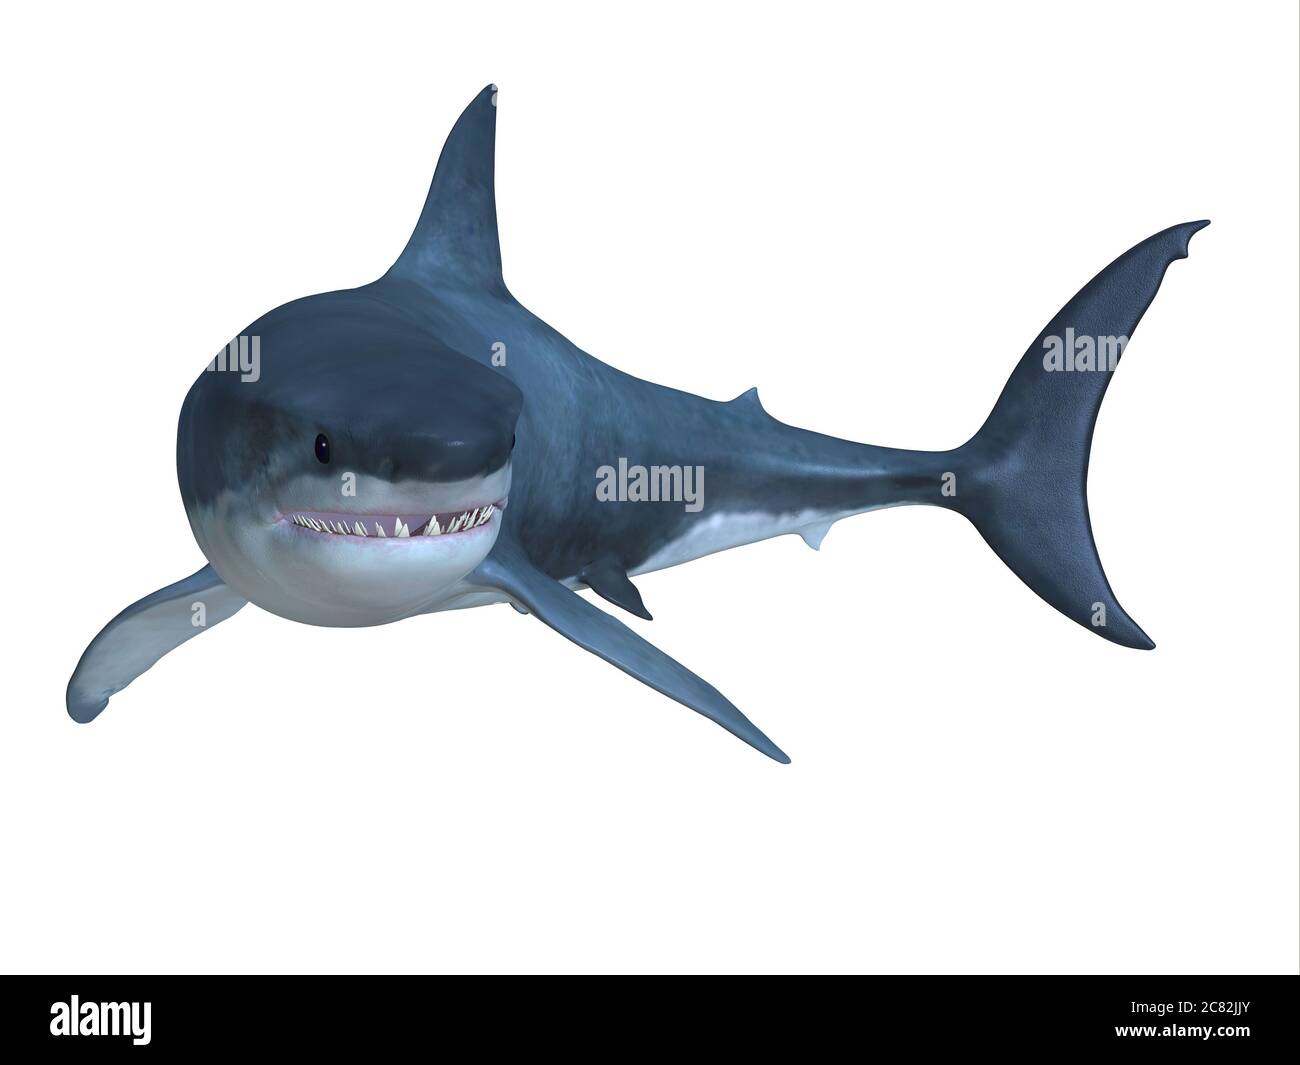 The Great White shark can be found in worldwide oceans and can live up to 70 years. Stock Photo